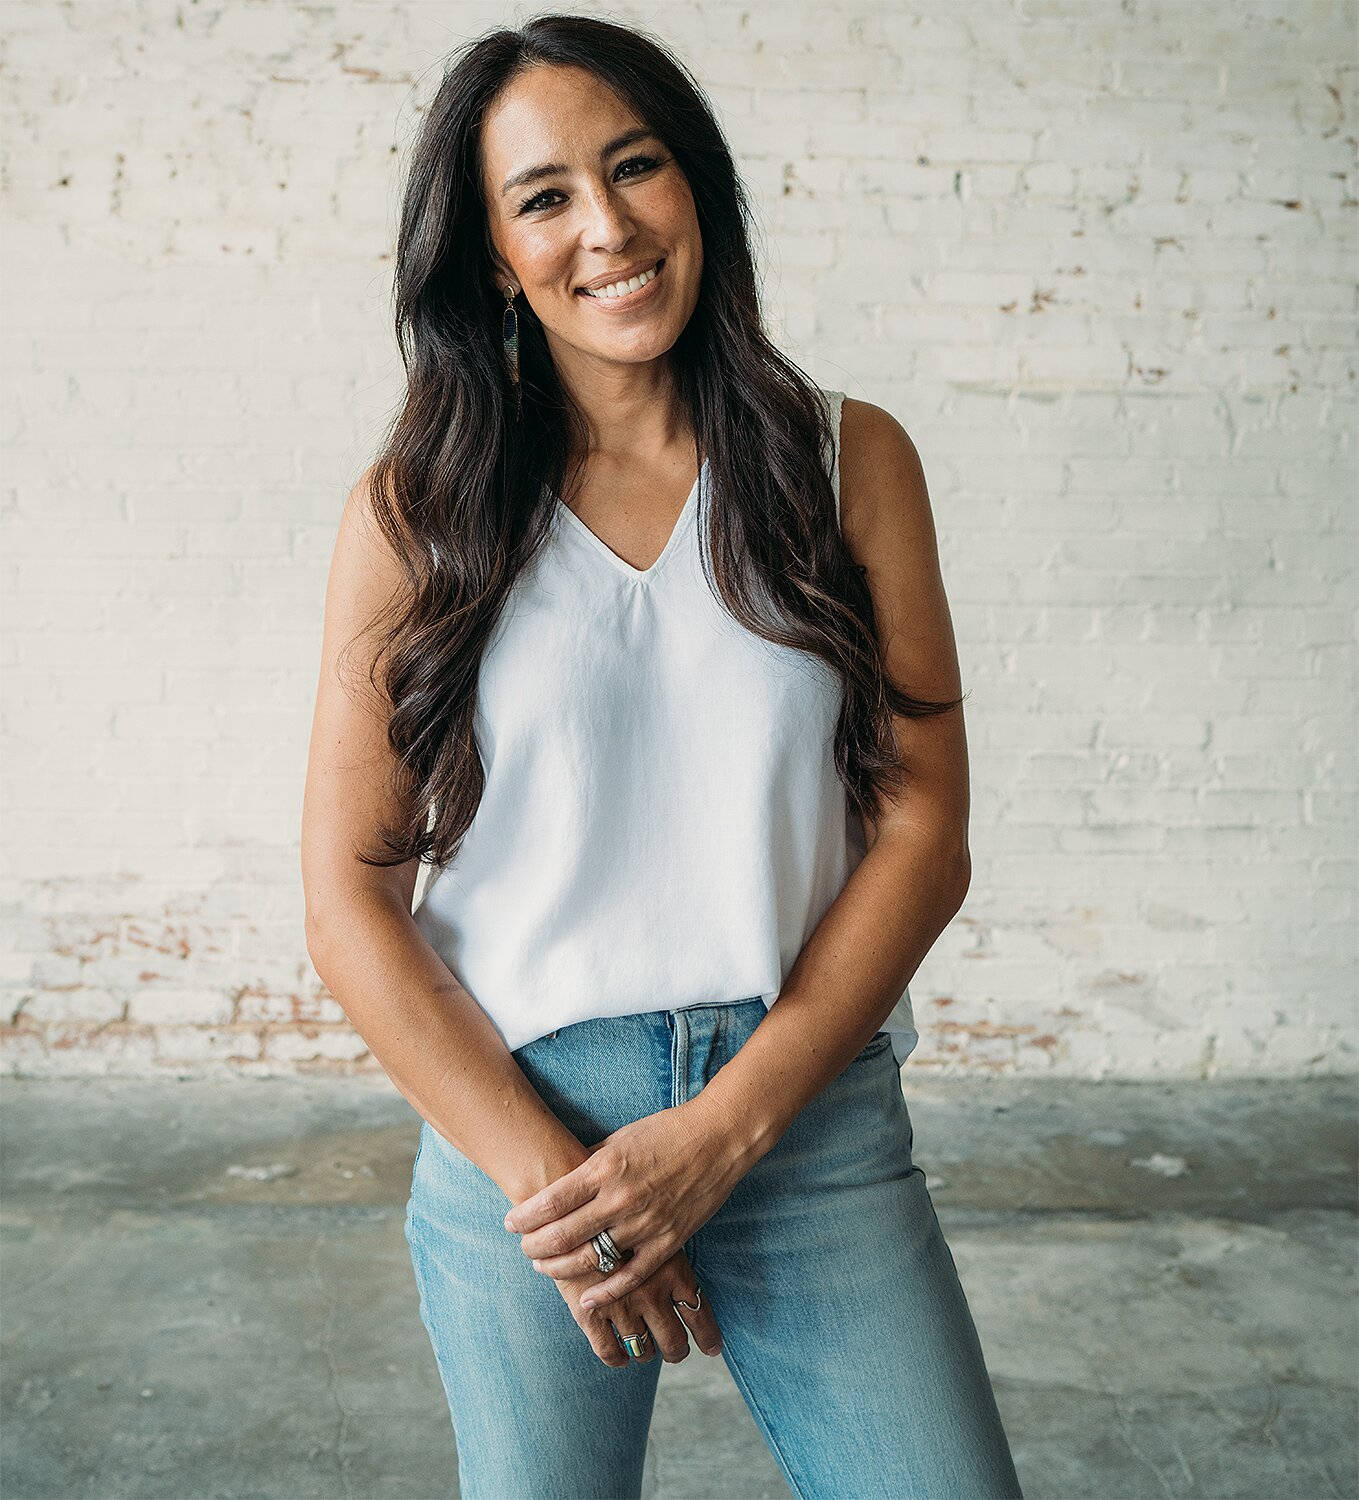 Joannagaines Einfaches Outfit. Wallpaper